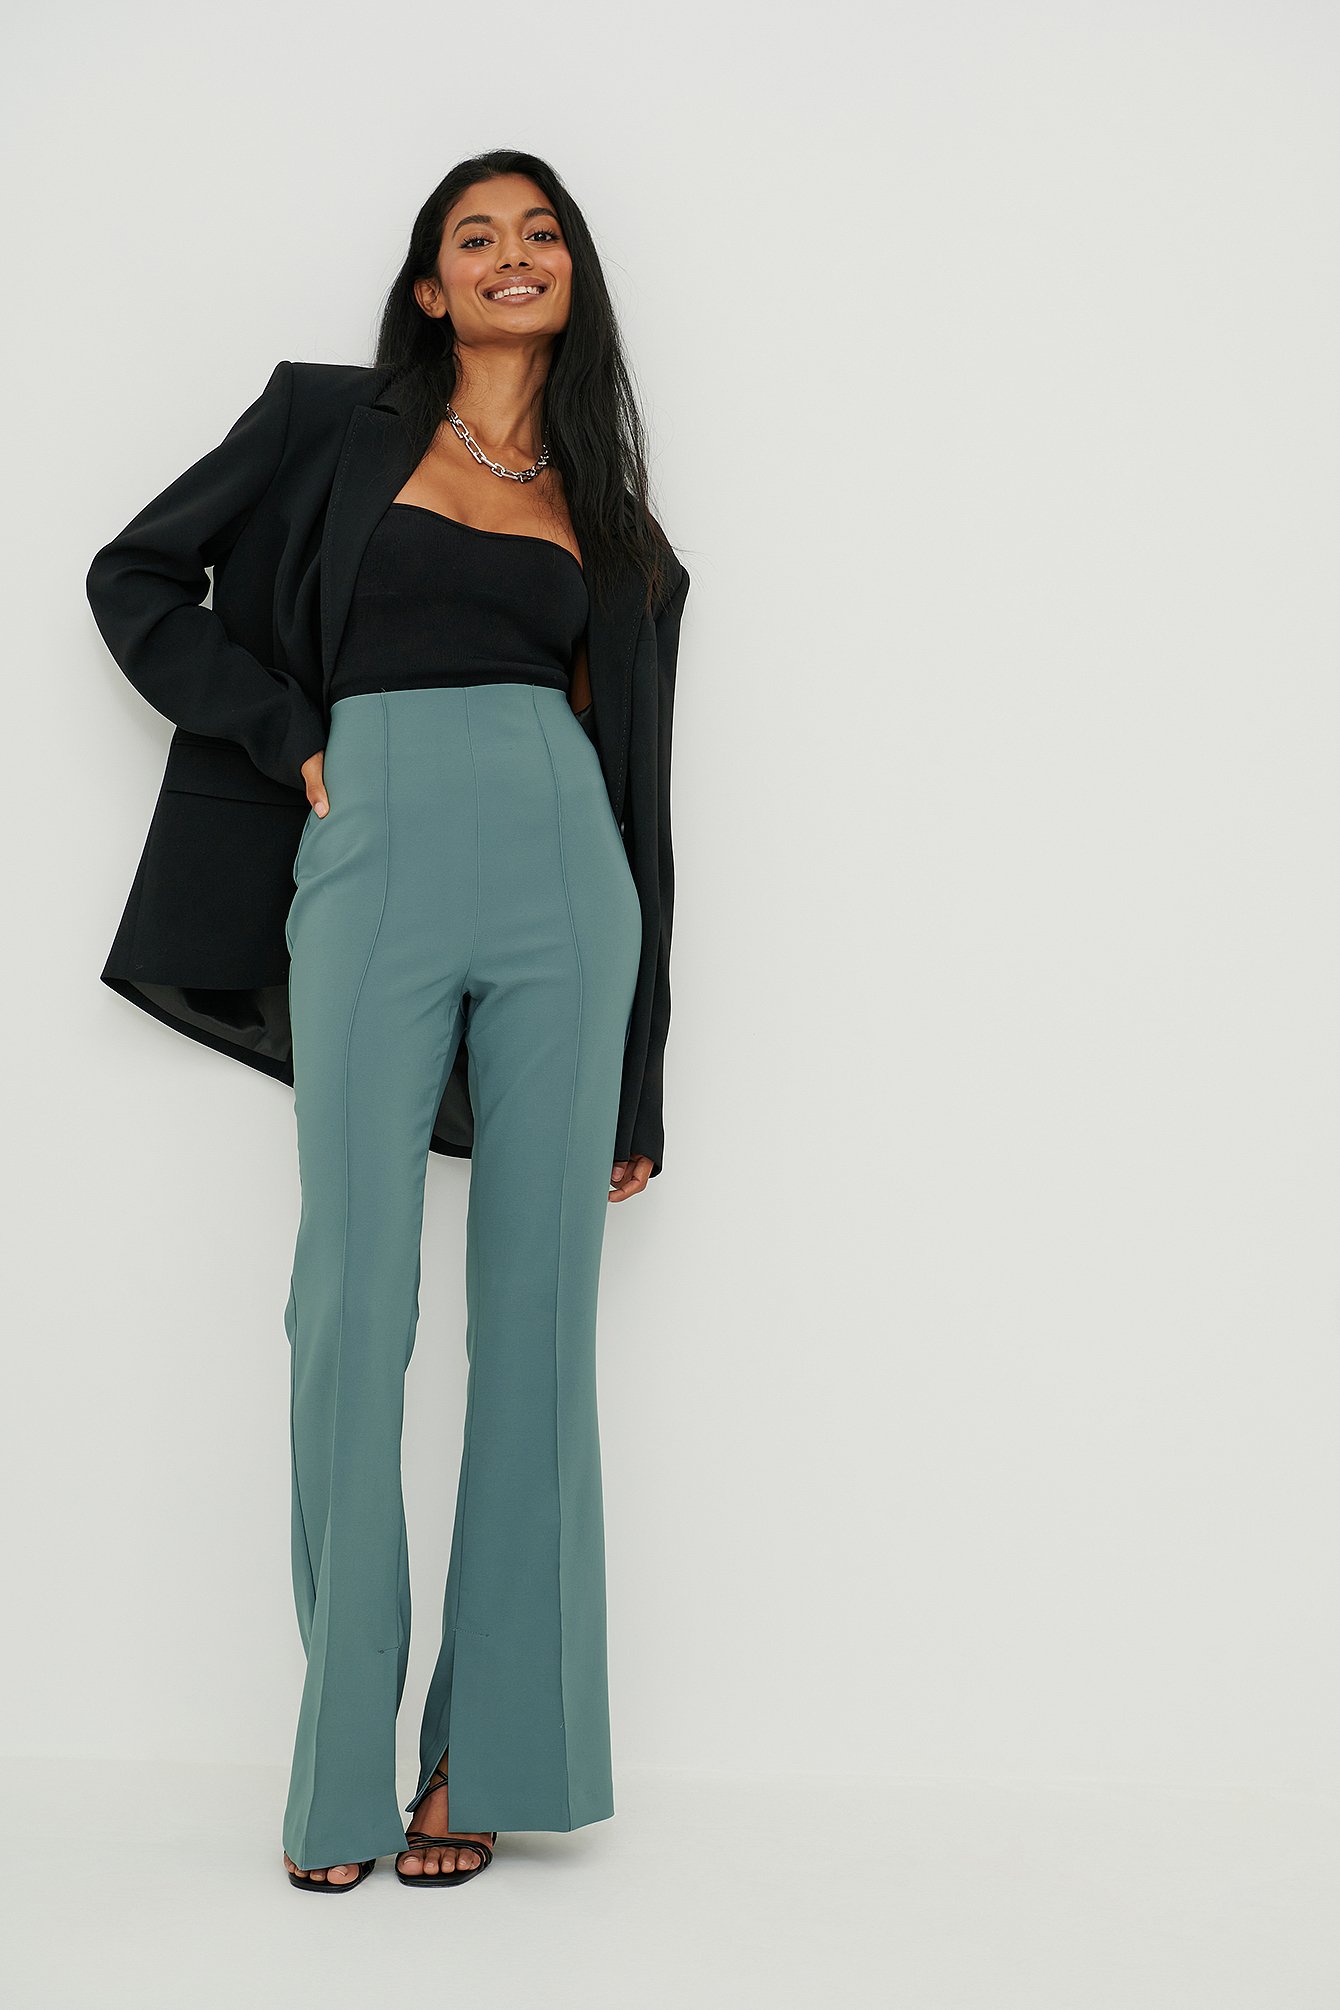 Recycled Slit Detailed Flared Pants Outfit.